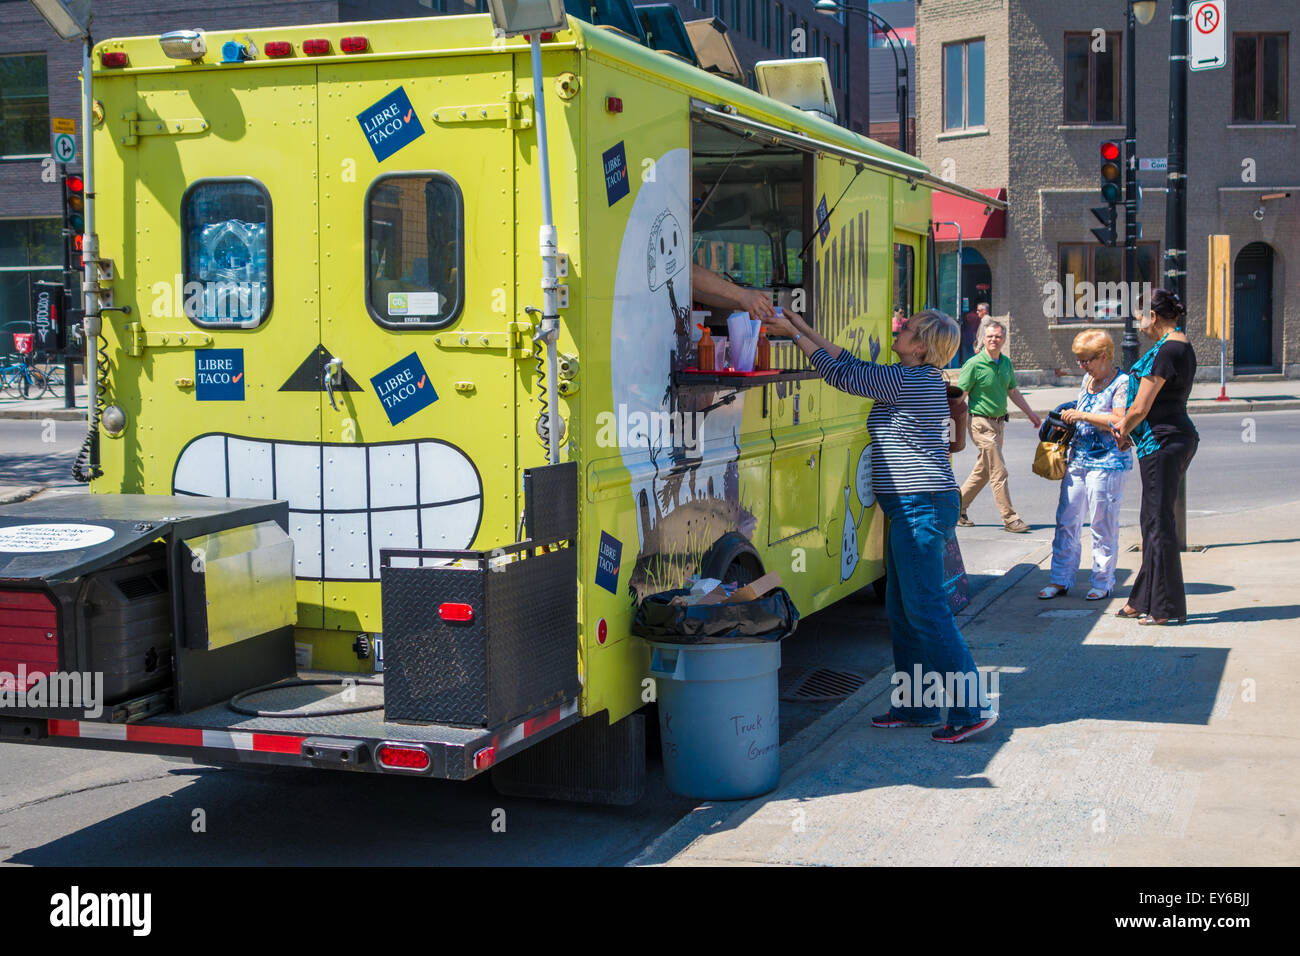 Food truck in Montreal Stock Photo